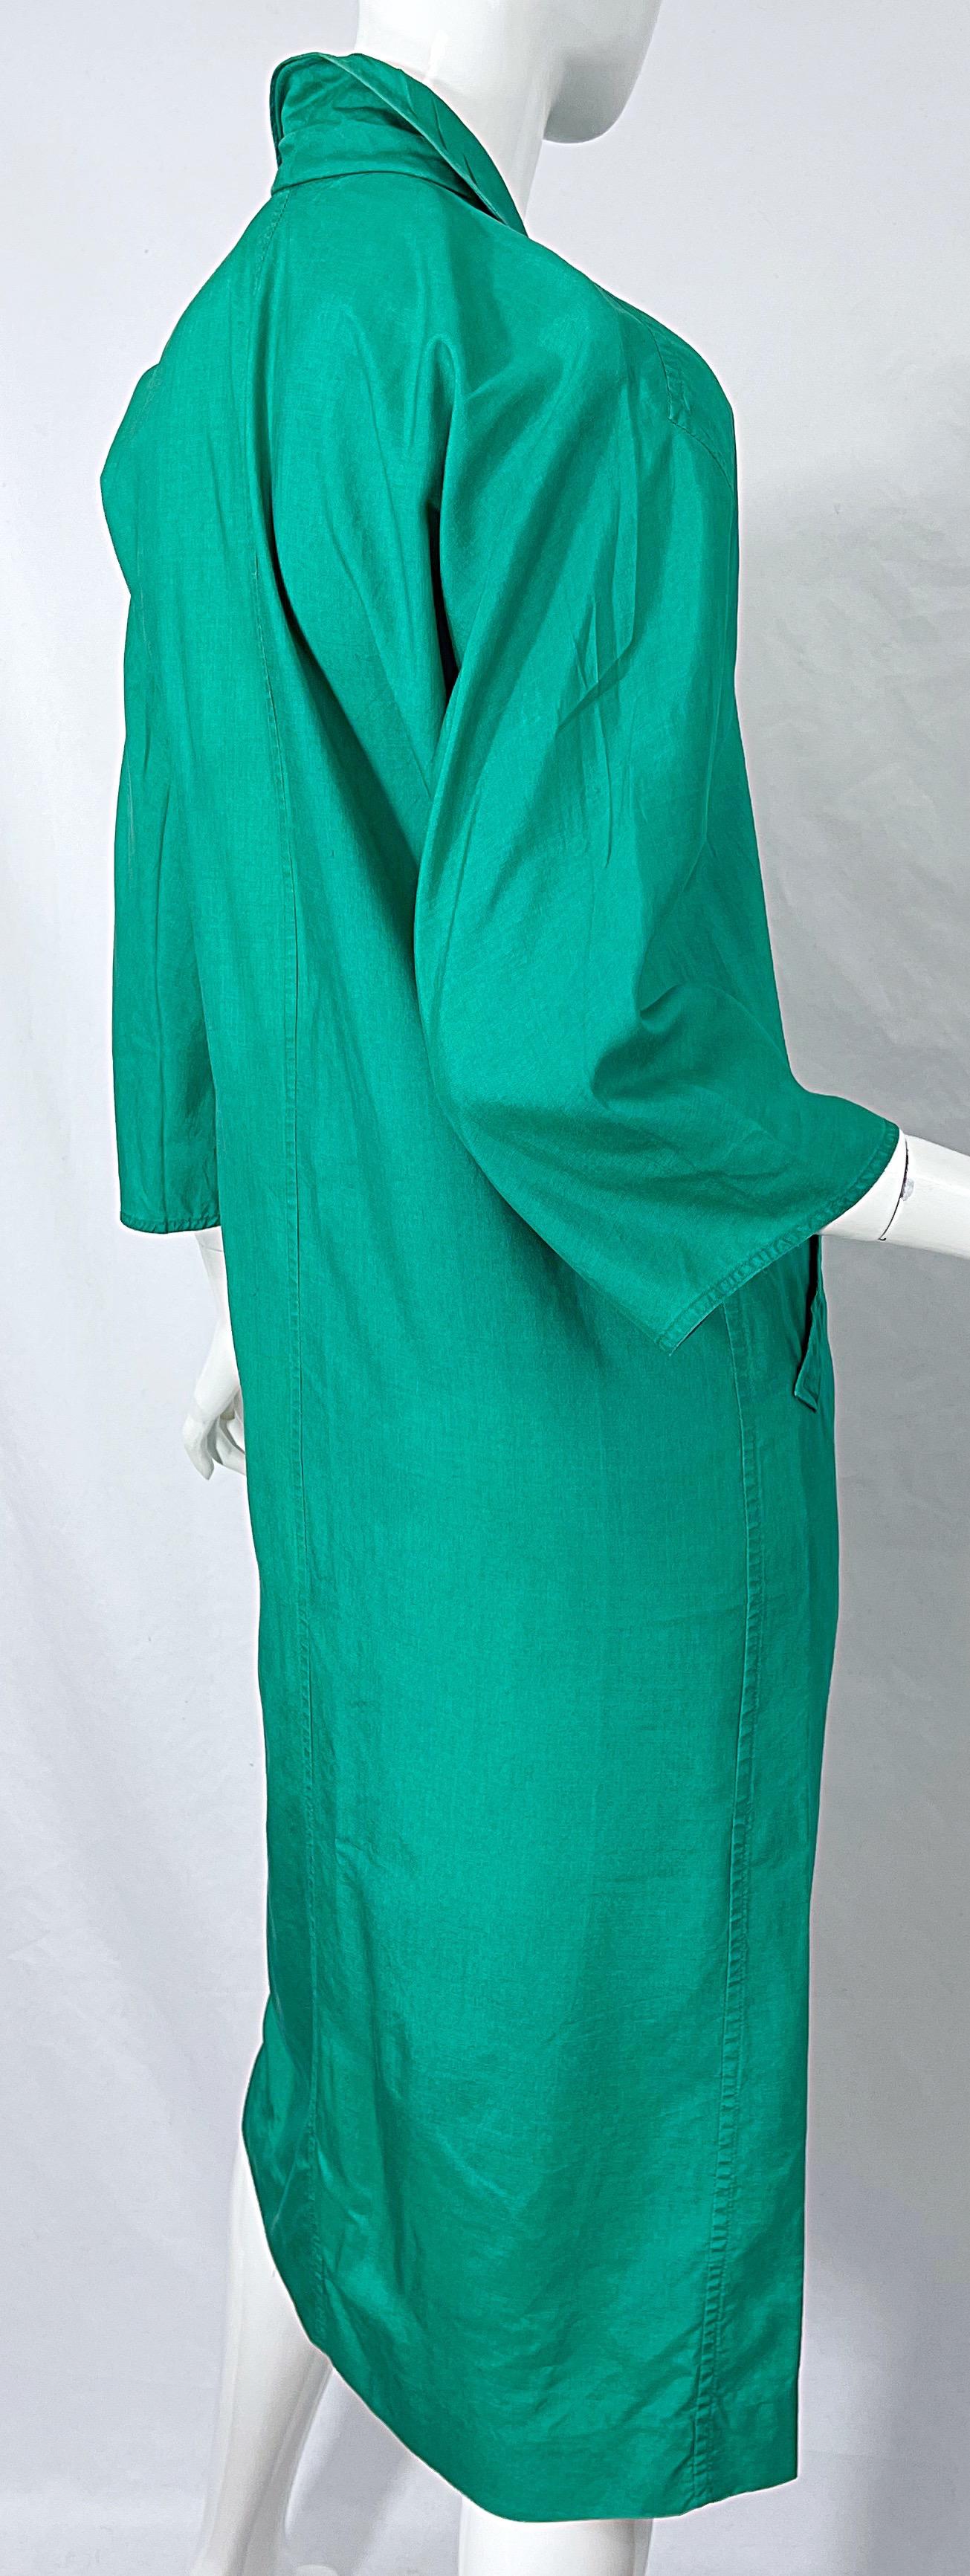 1970s Halston Kelly Green Silk 3/4 Sleeves Vintage 70s Shirt Dress w/ Pockets For Sale 7